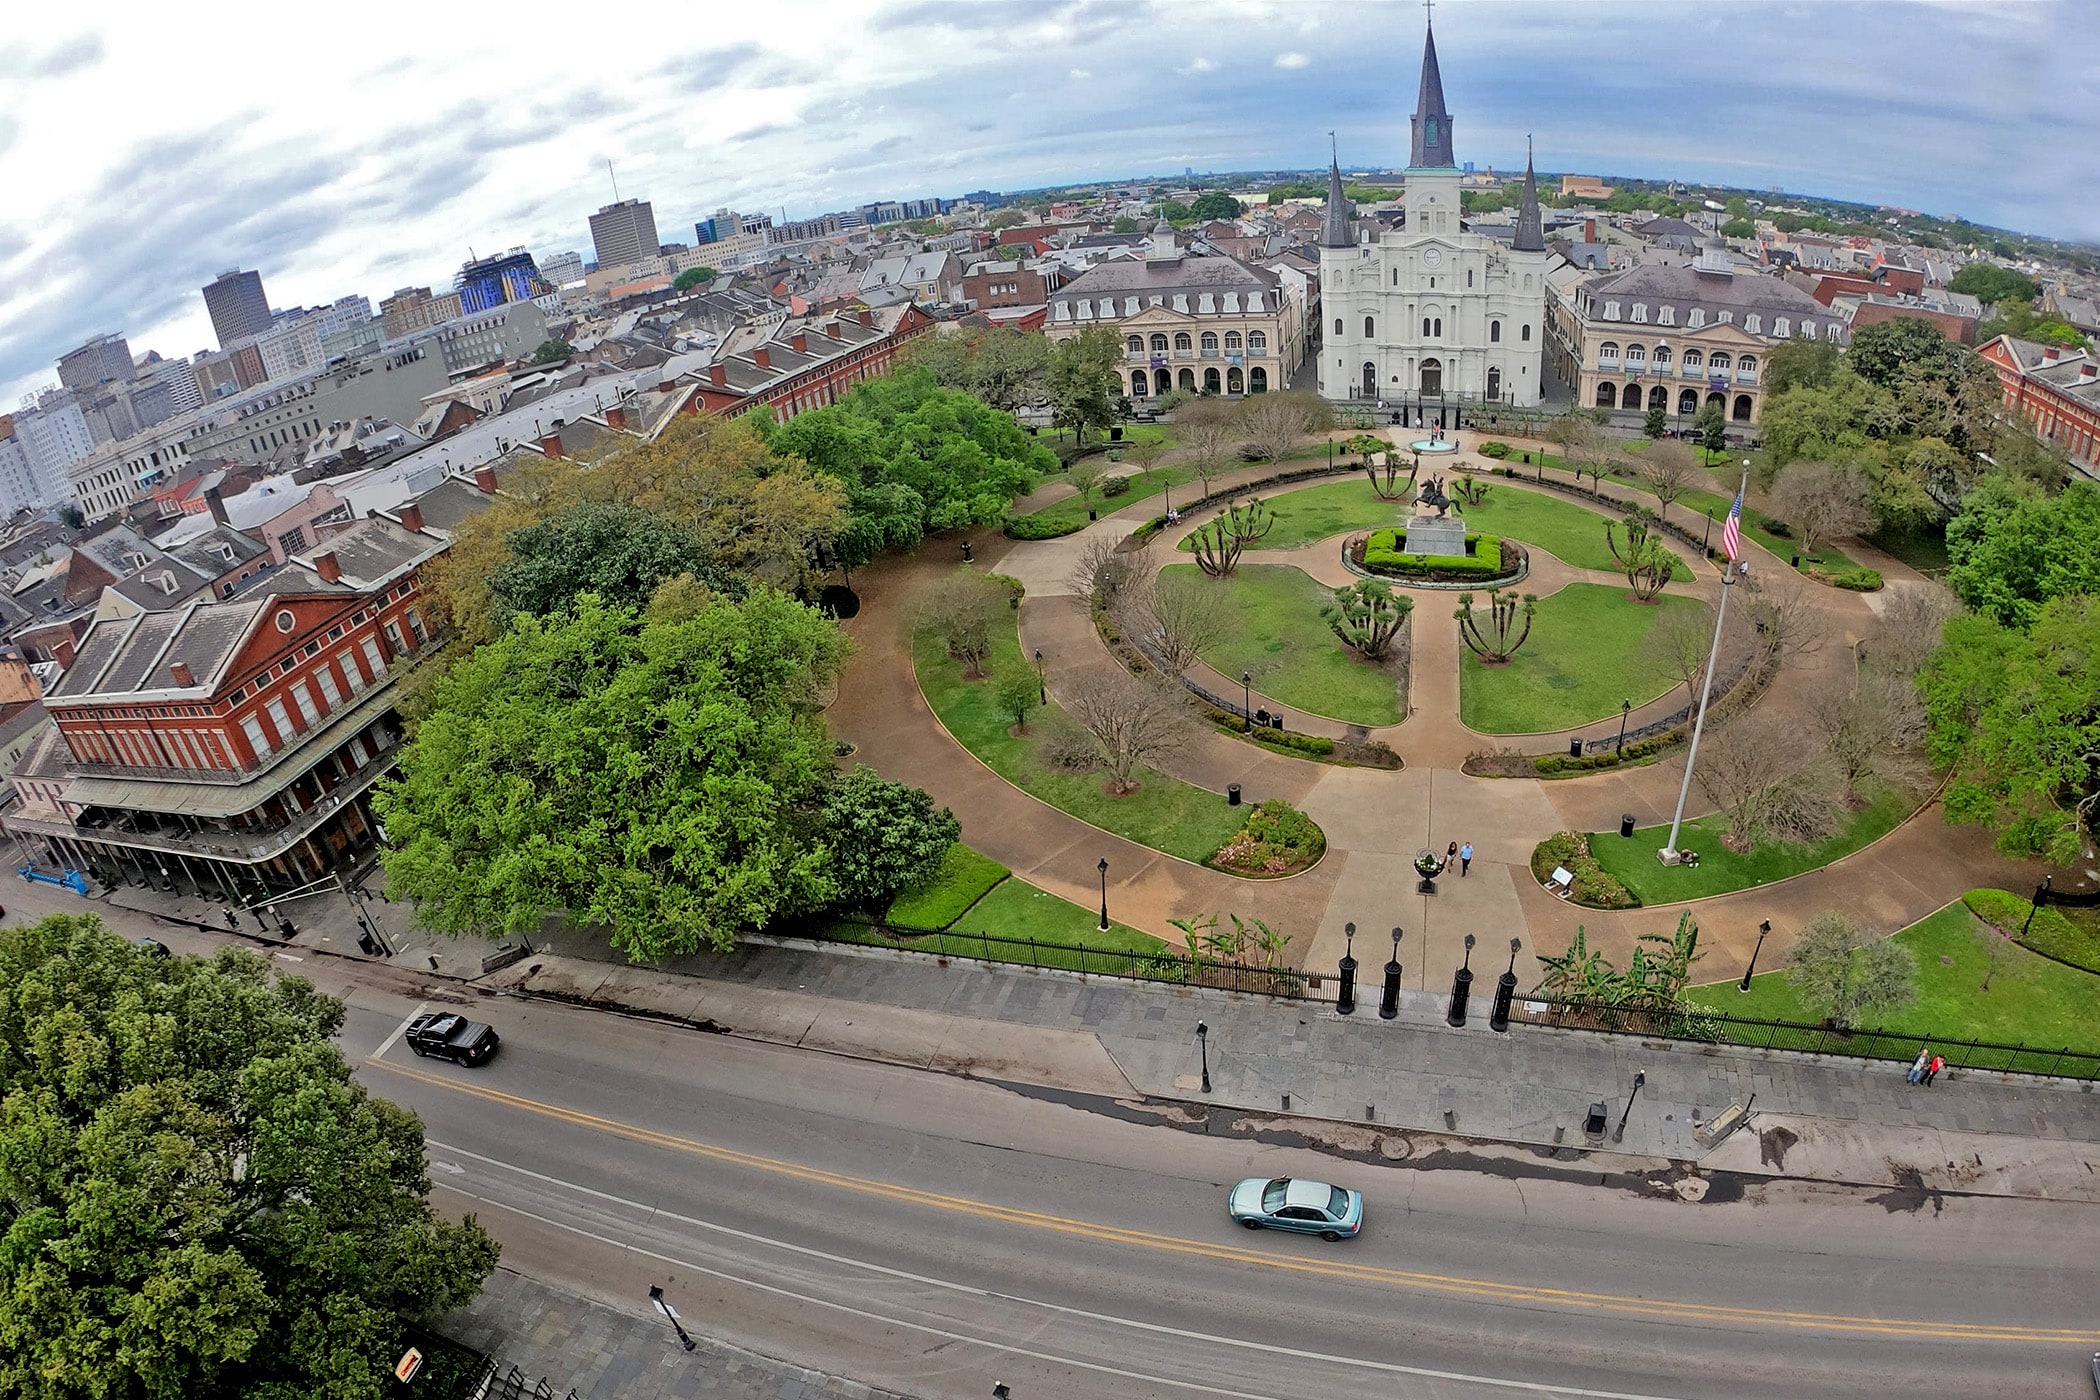 Jackson Square and Decatur Street are lightly travelled on what would normally be a bustling weekend afternoon. Photographed on Saturday, March 21, 2020. (Photo by Michael DeMocker)